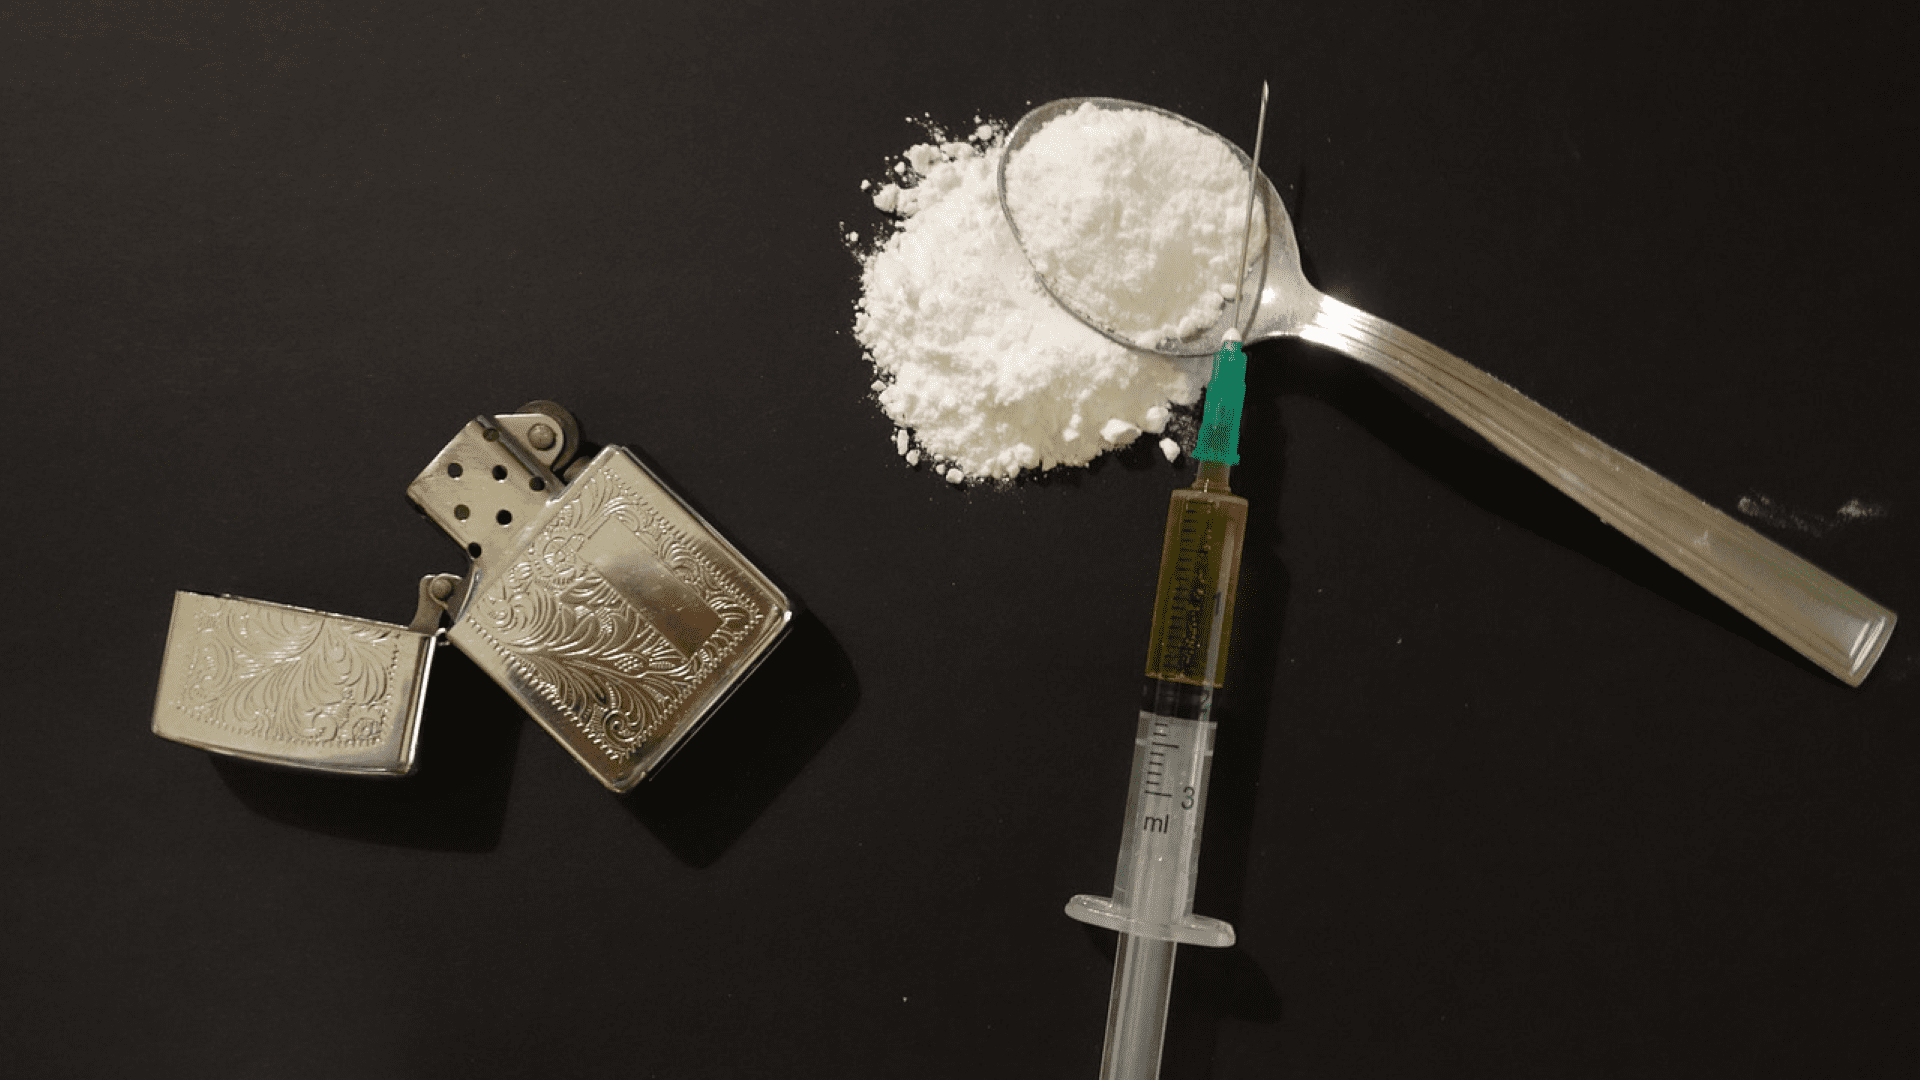 Sensationalism around exceptional cases of heroin abuse hurts the perception of drug users, reinforcing a policy of overcriminalization.